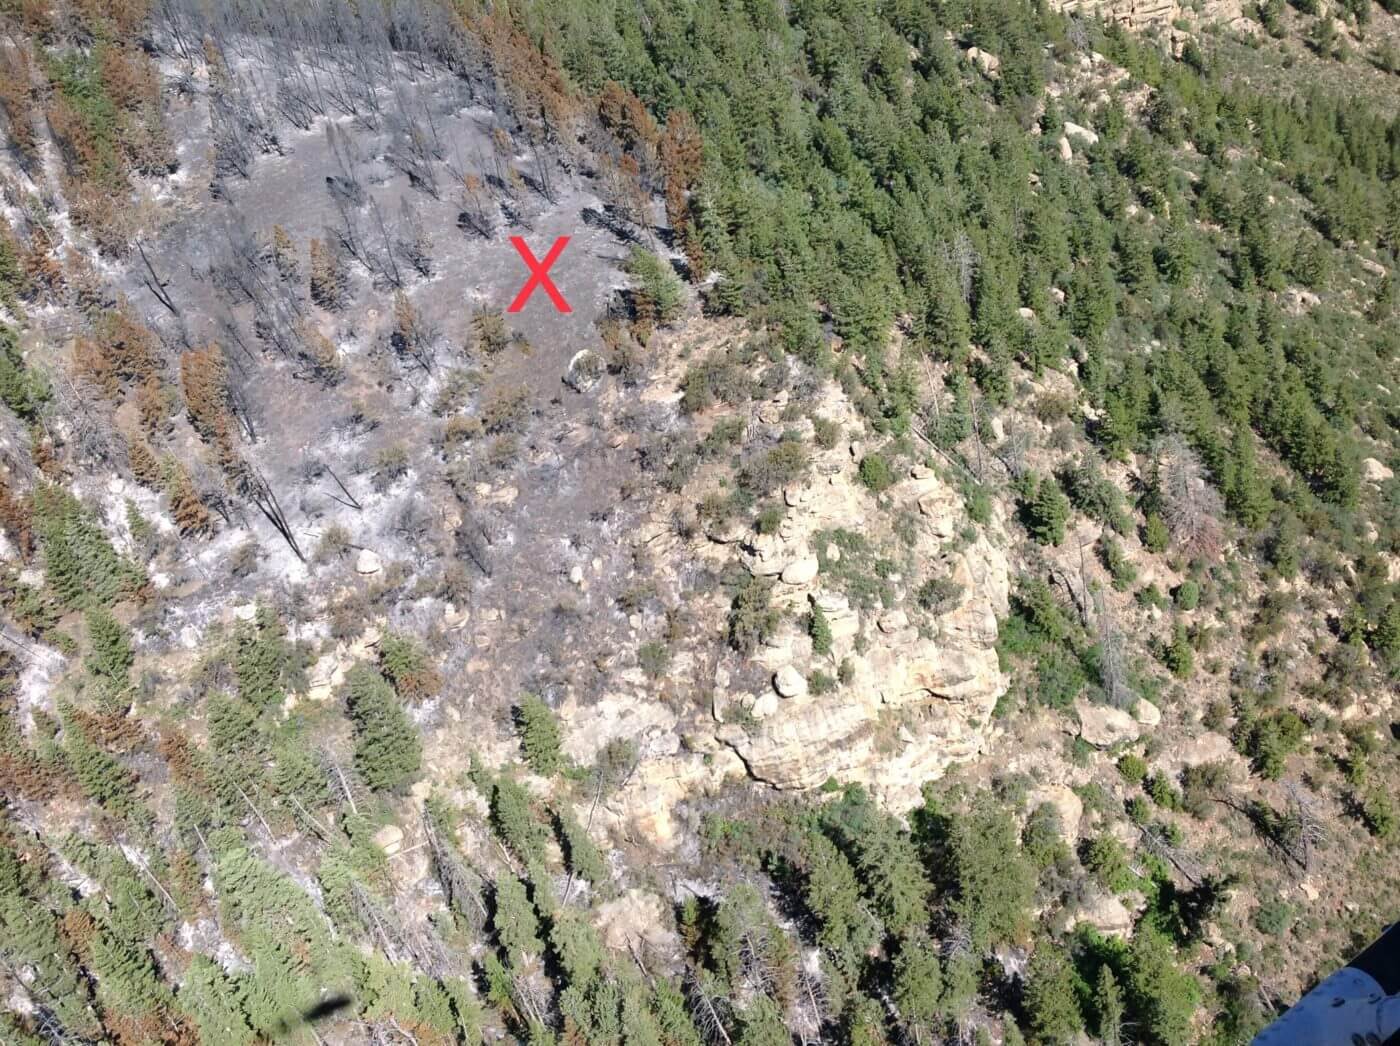 The rugged mountainous terrain from which the firefighter was evacuated